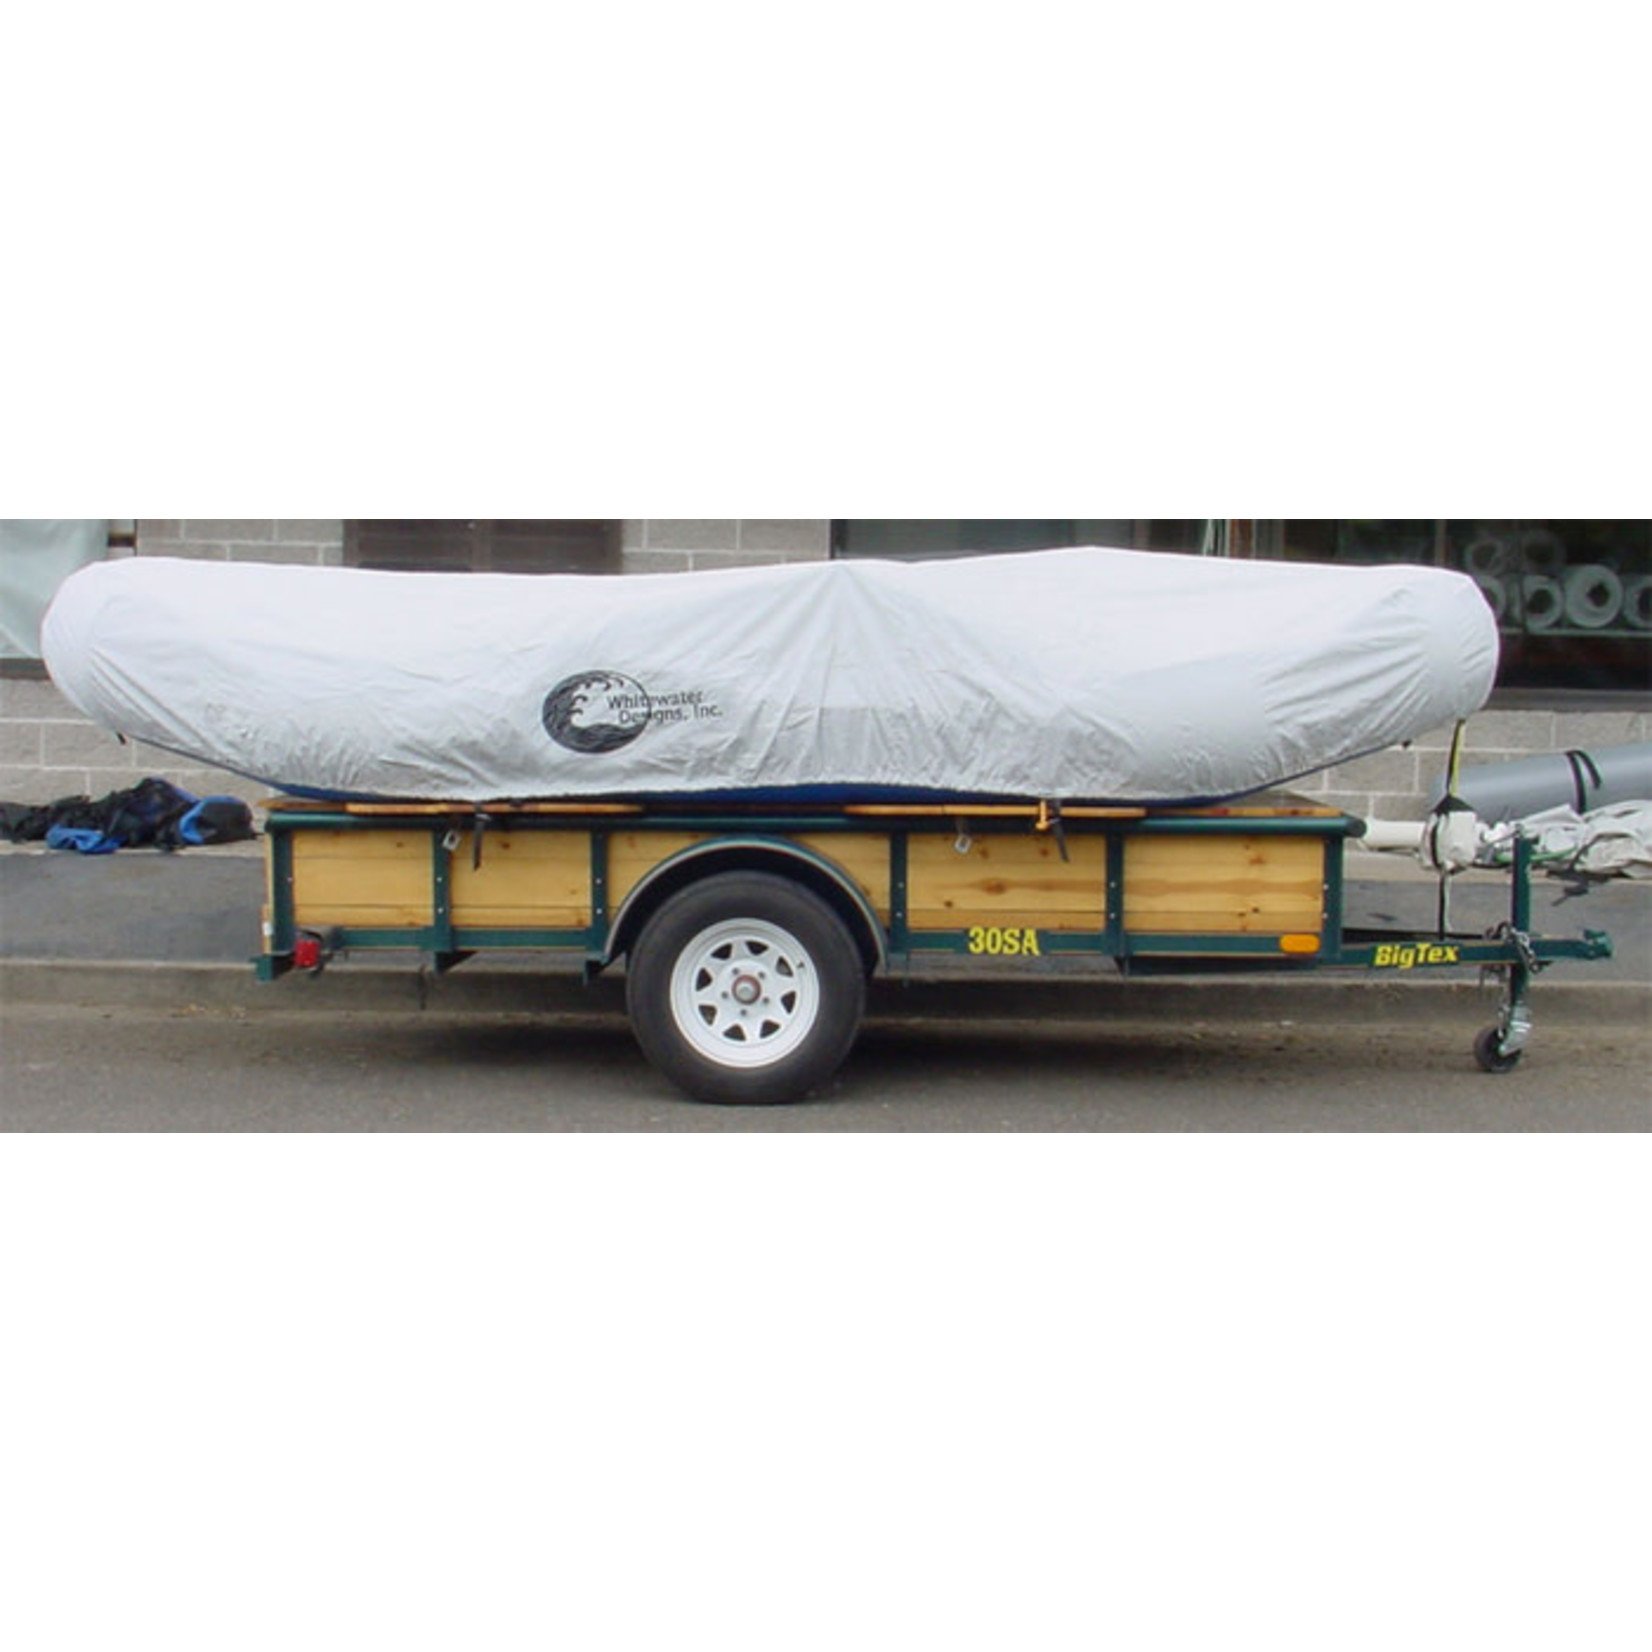 Whitewater Designs Whitewater Designs Inflated Raft Storage and Cover